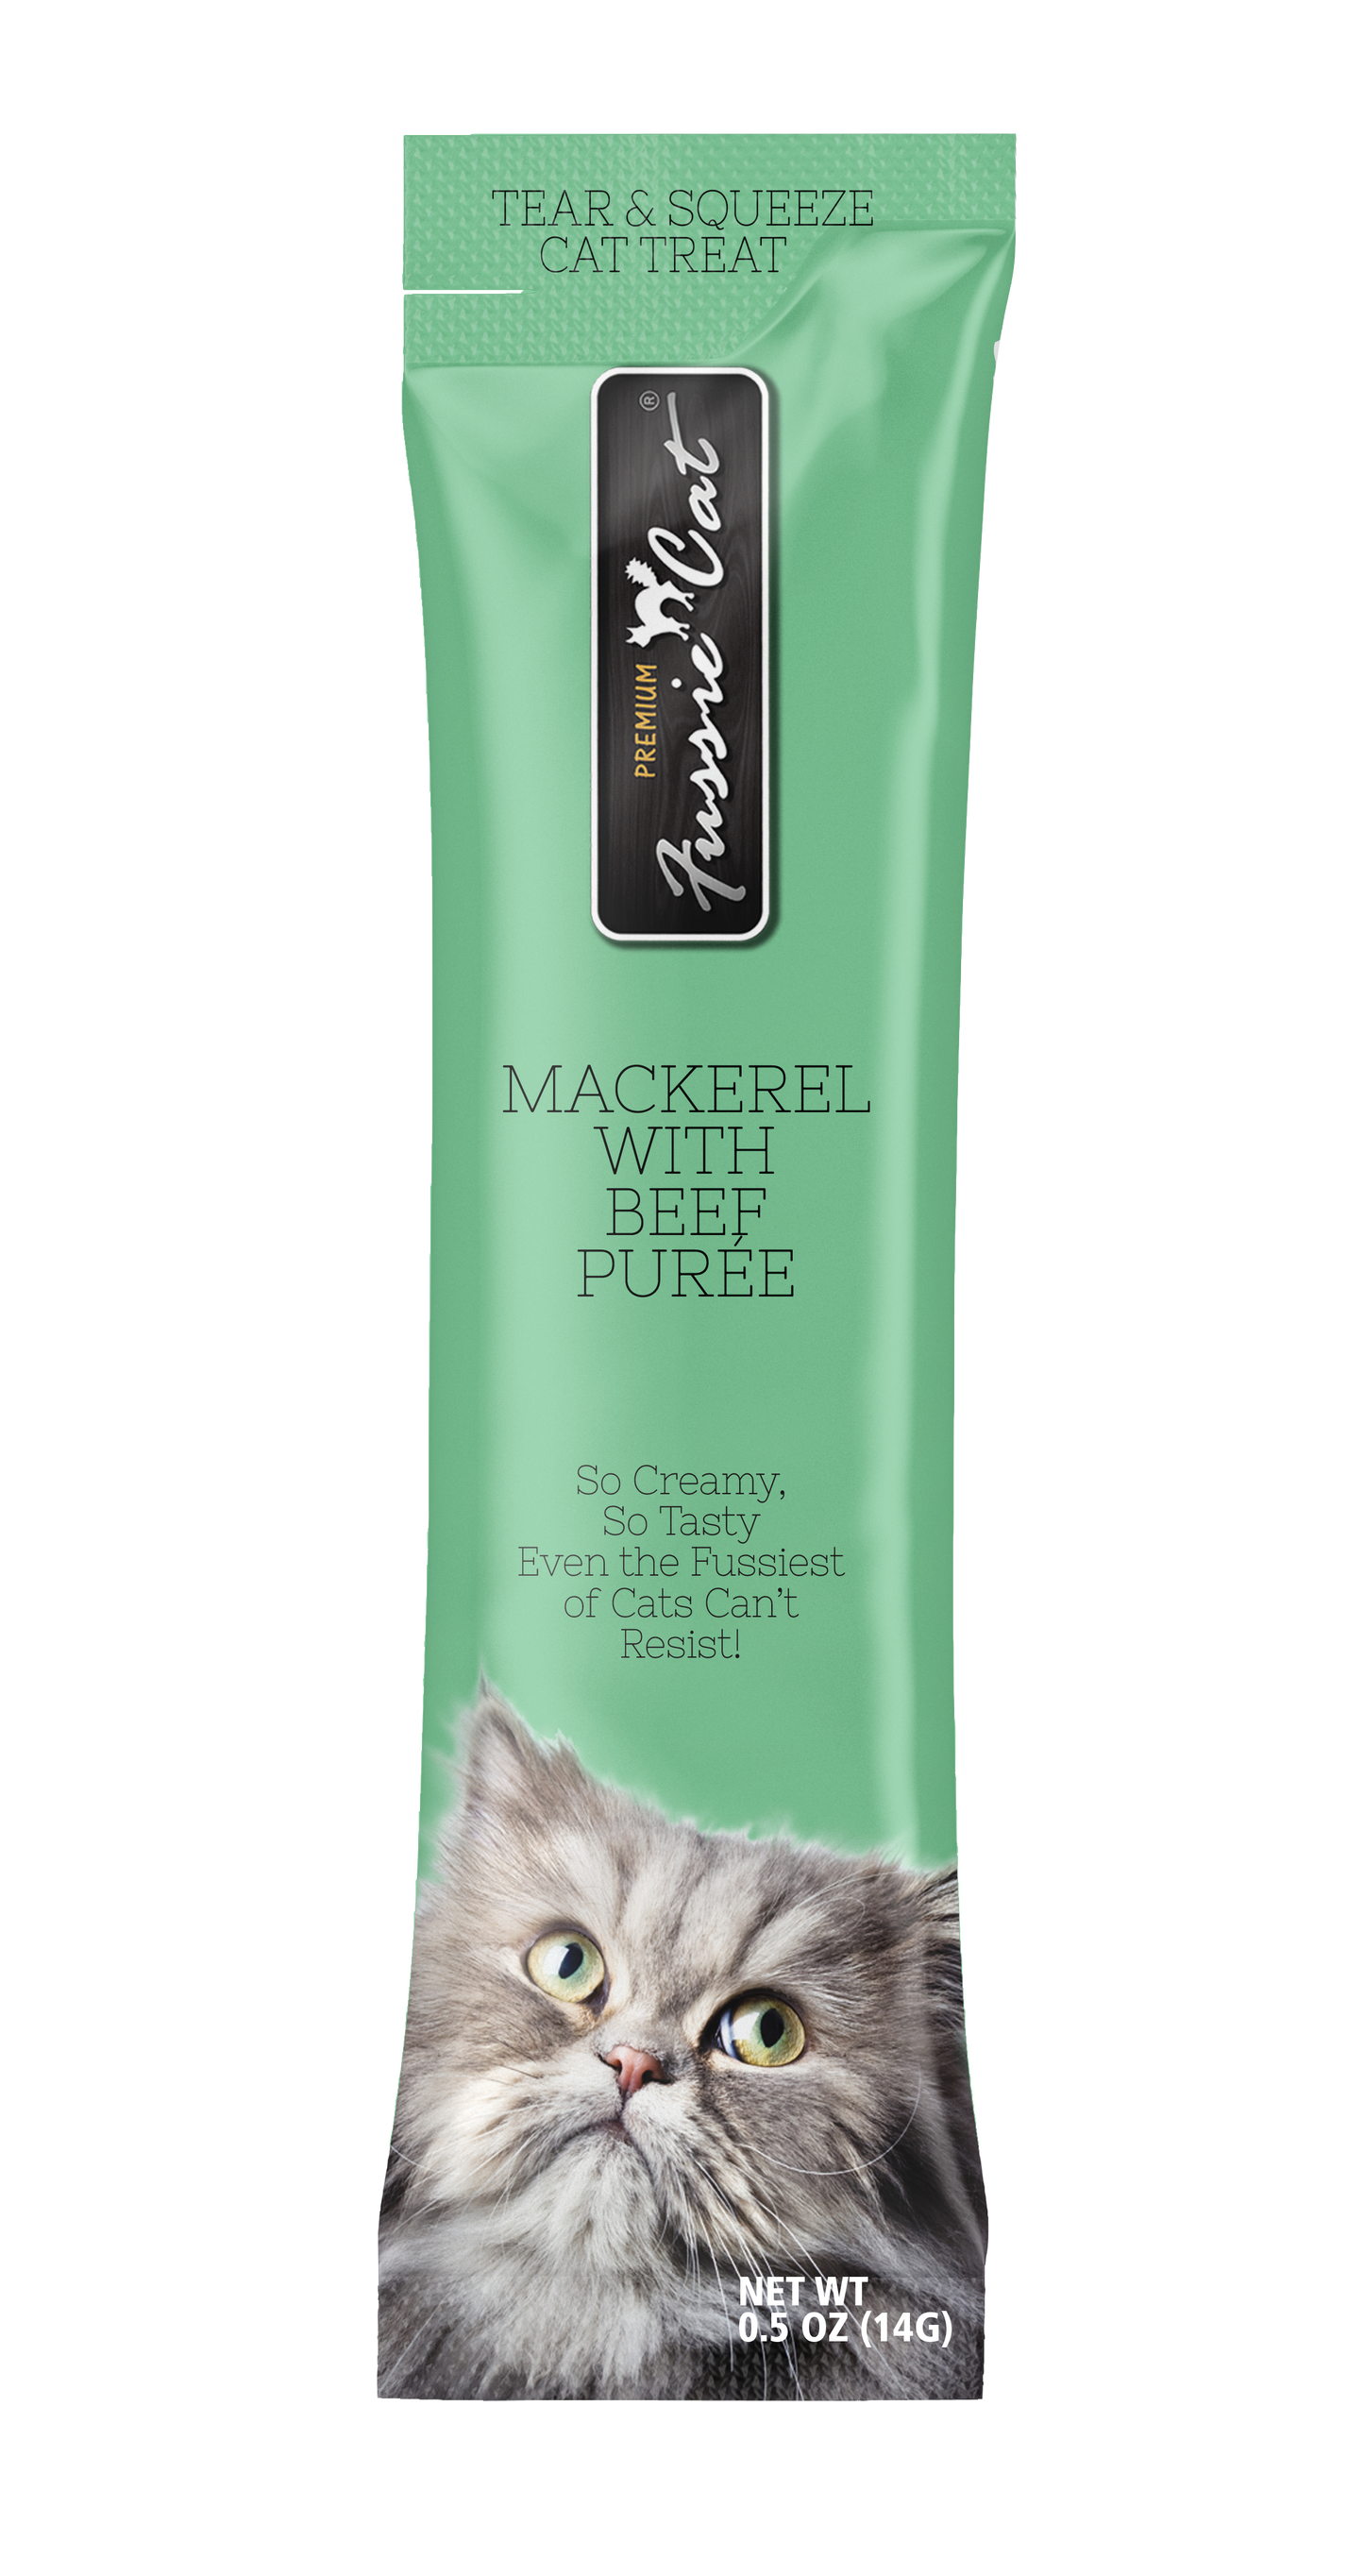 Fussie Cat Mackerel With Beef Purée 0.5-oz, 4-Pack, Cat Treat